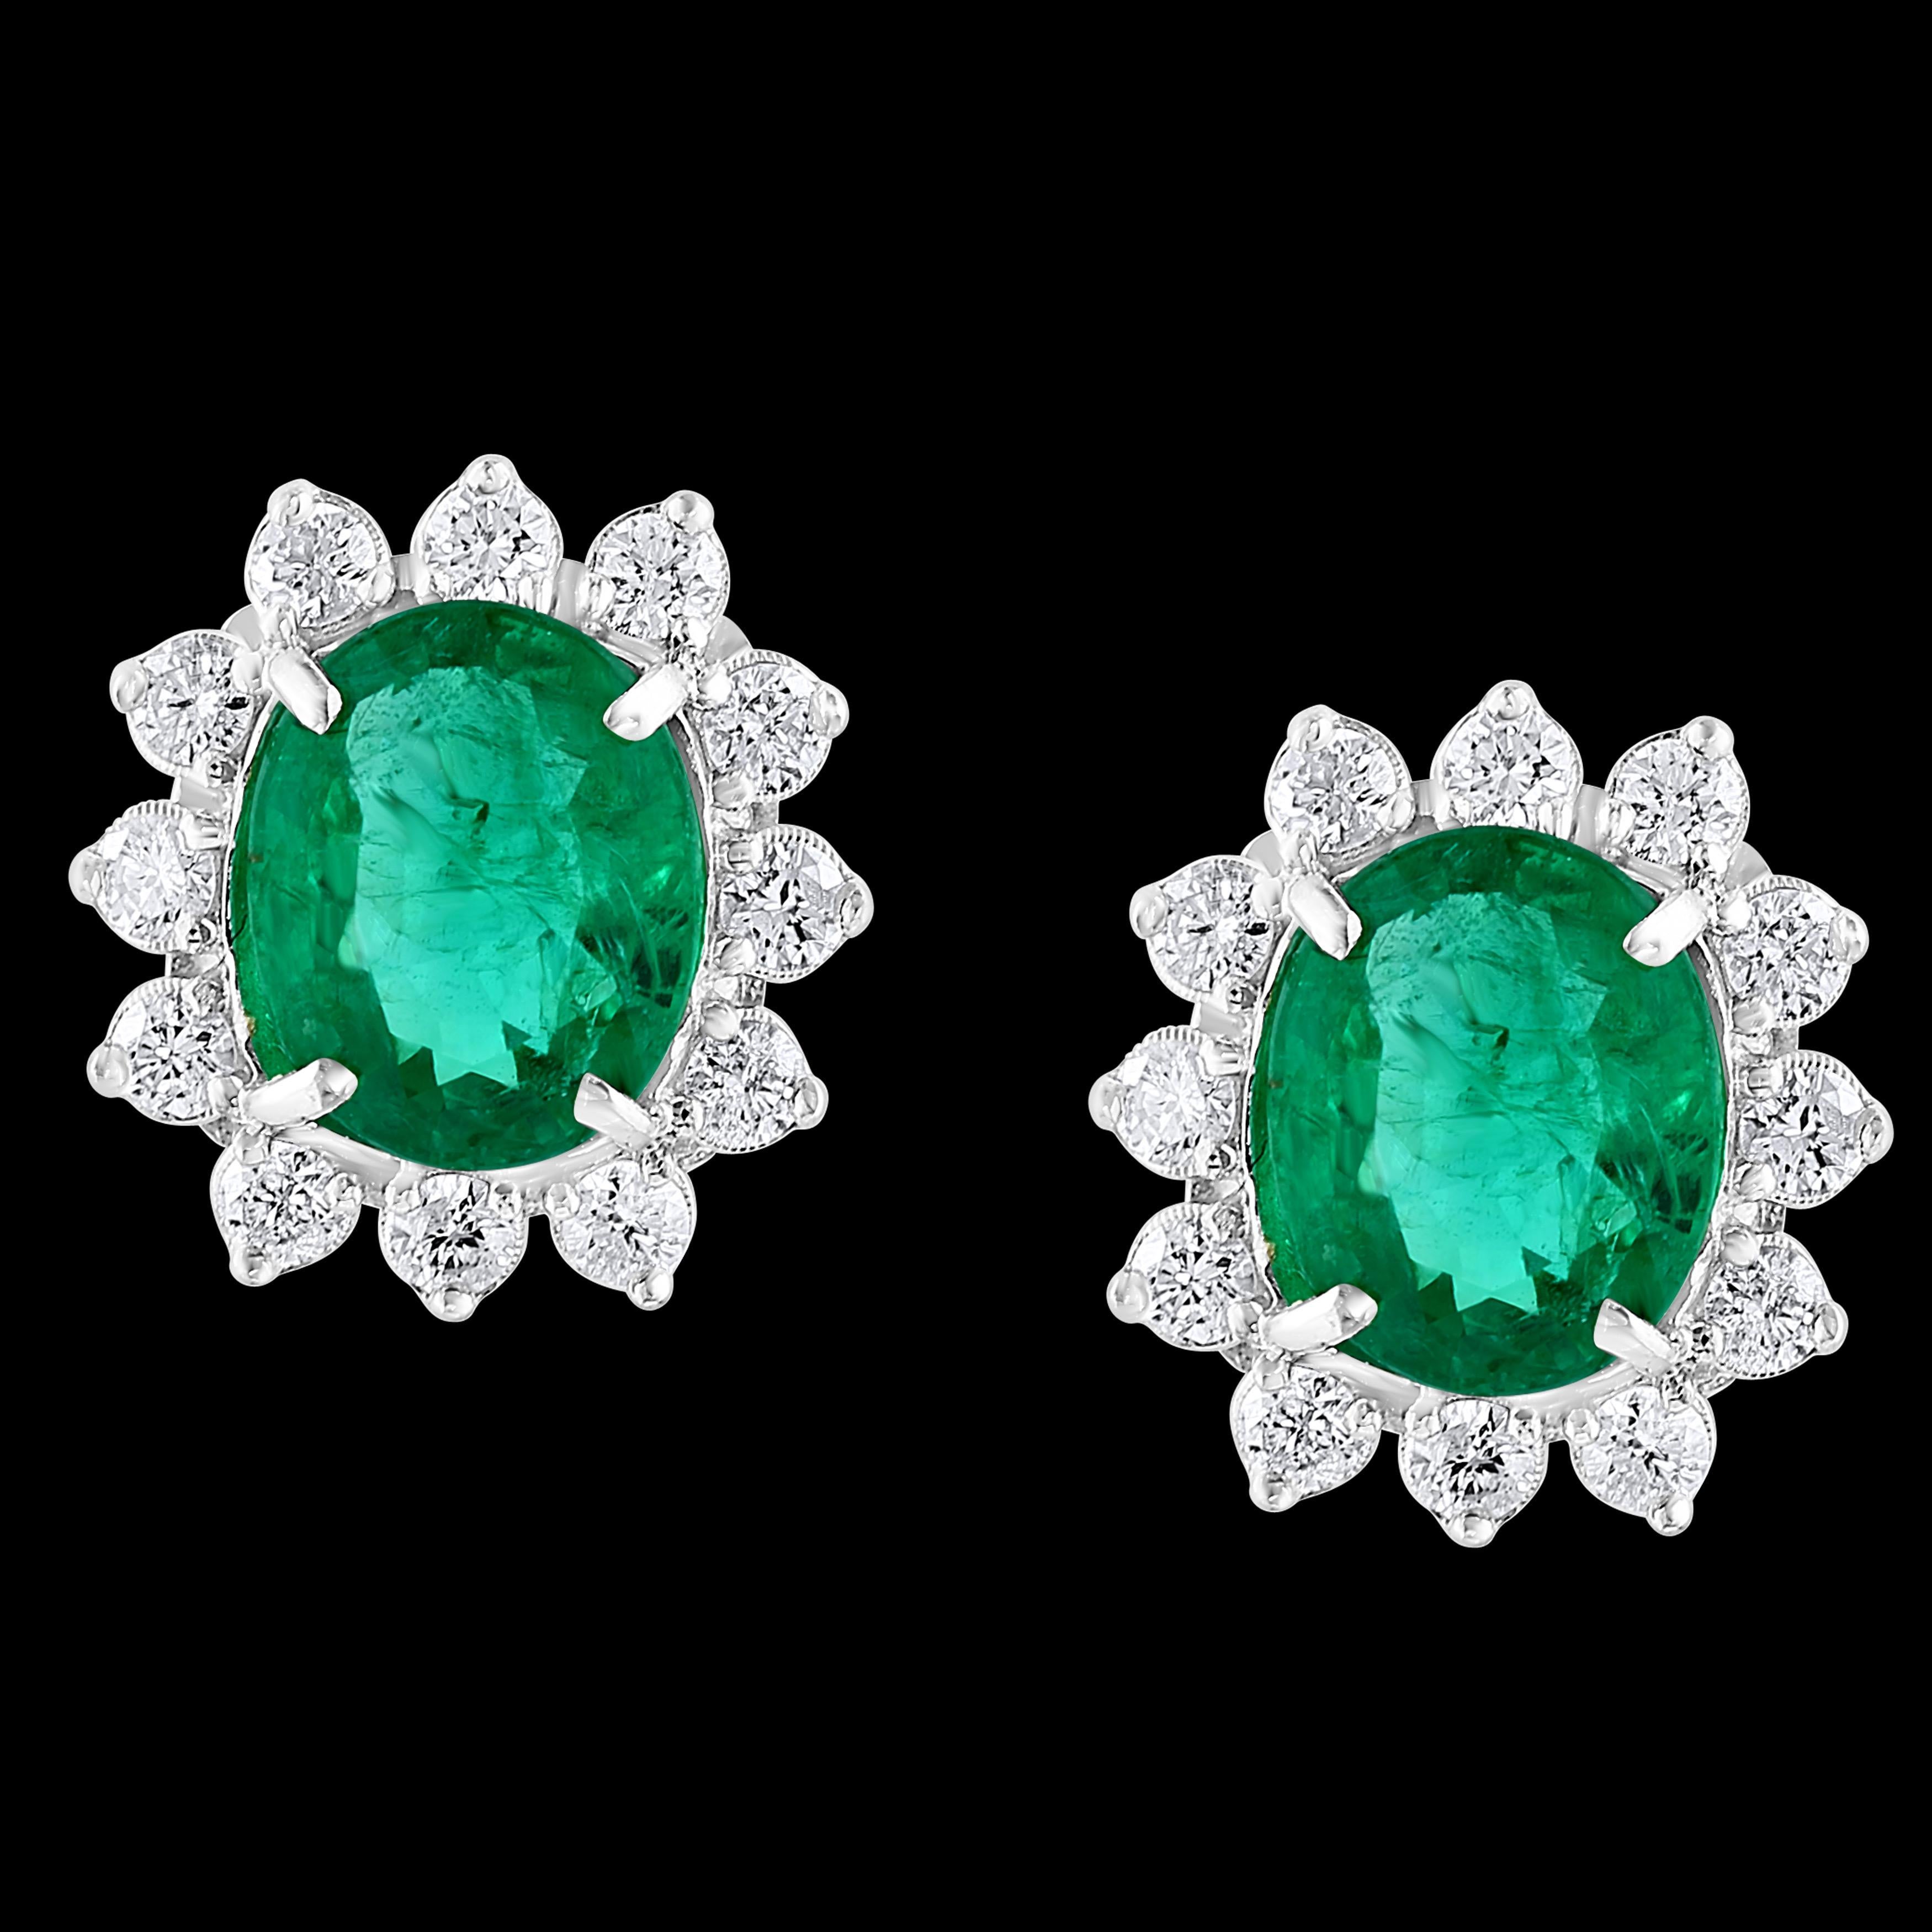 8 Ct Oval Colombian Emerald & 2.5 Ct Diamond Post Back Earrings 18 Kt White Gold In Excellent Condition For Sale In New York, NY